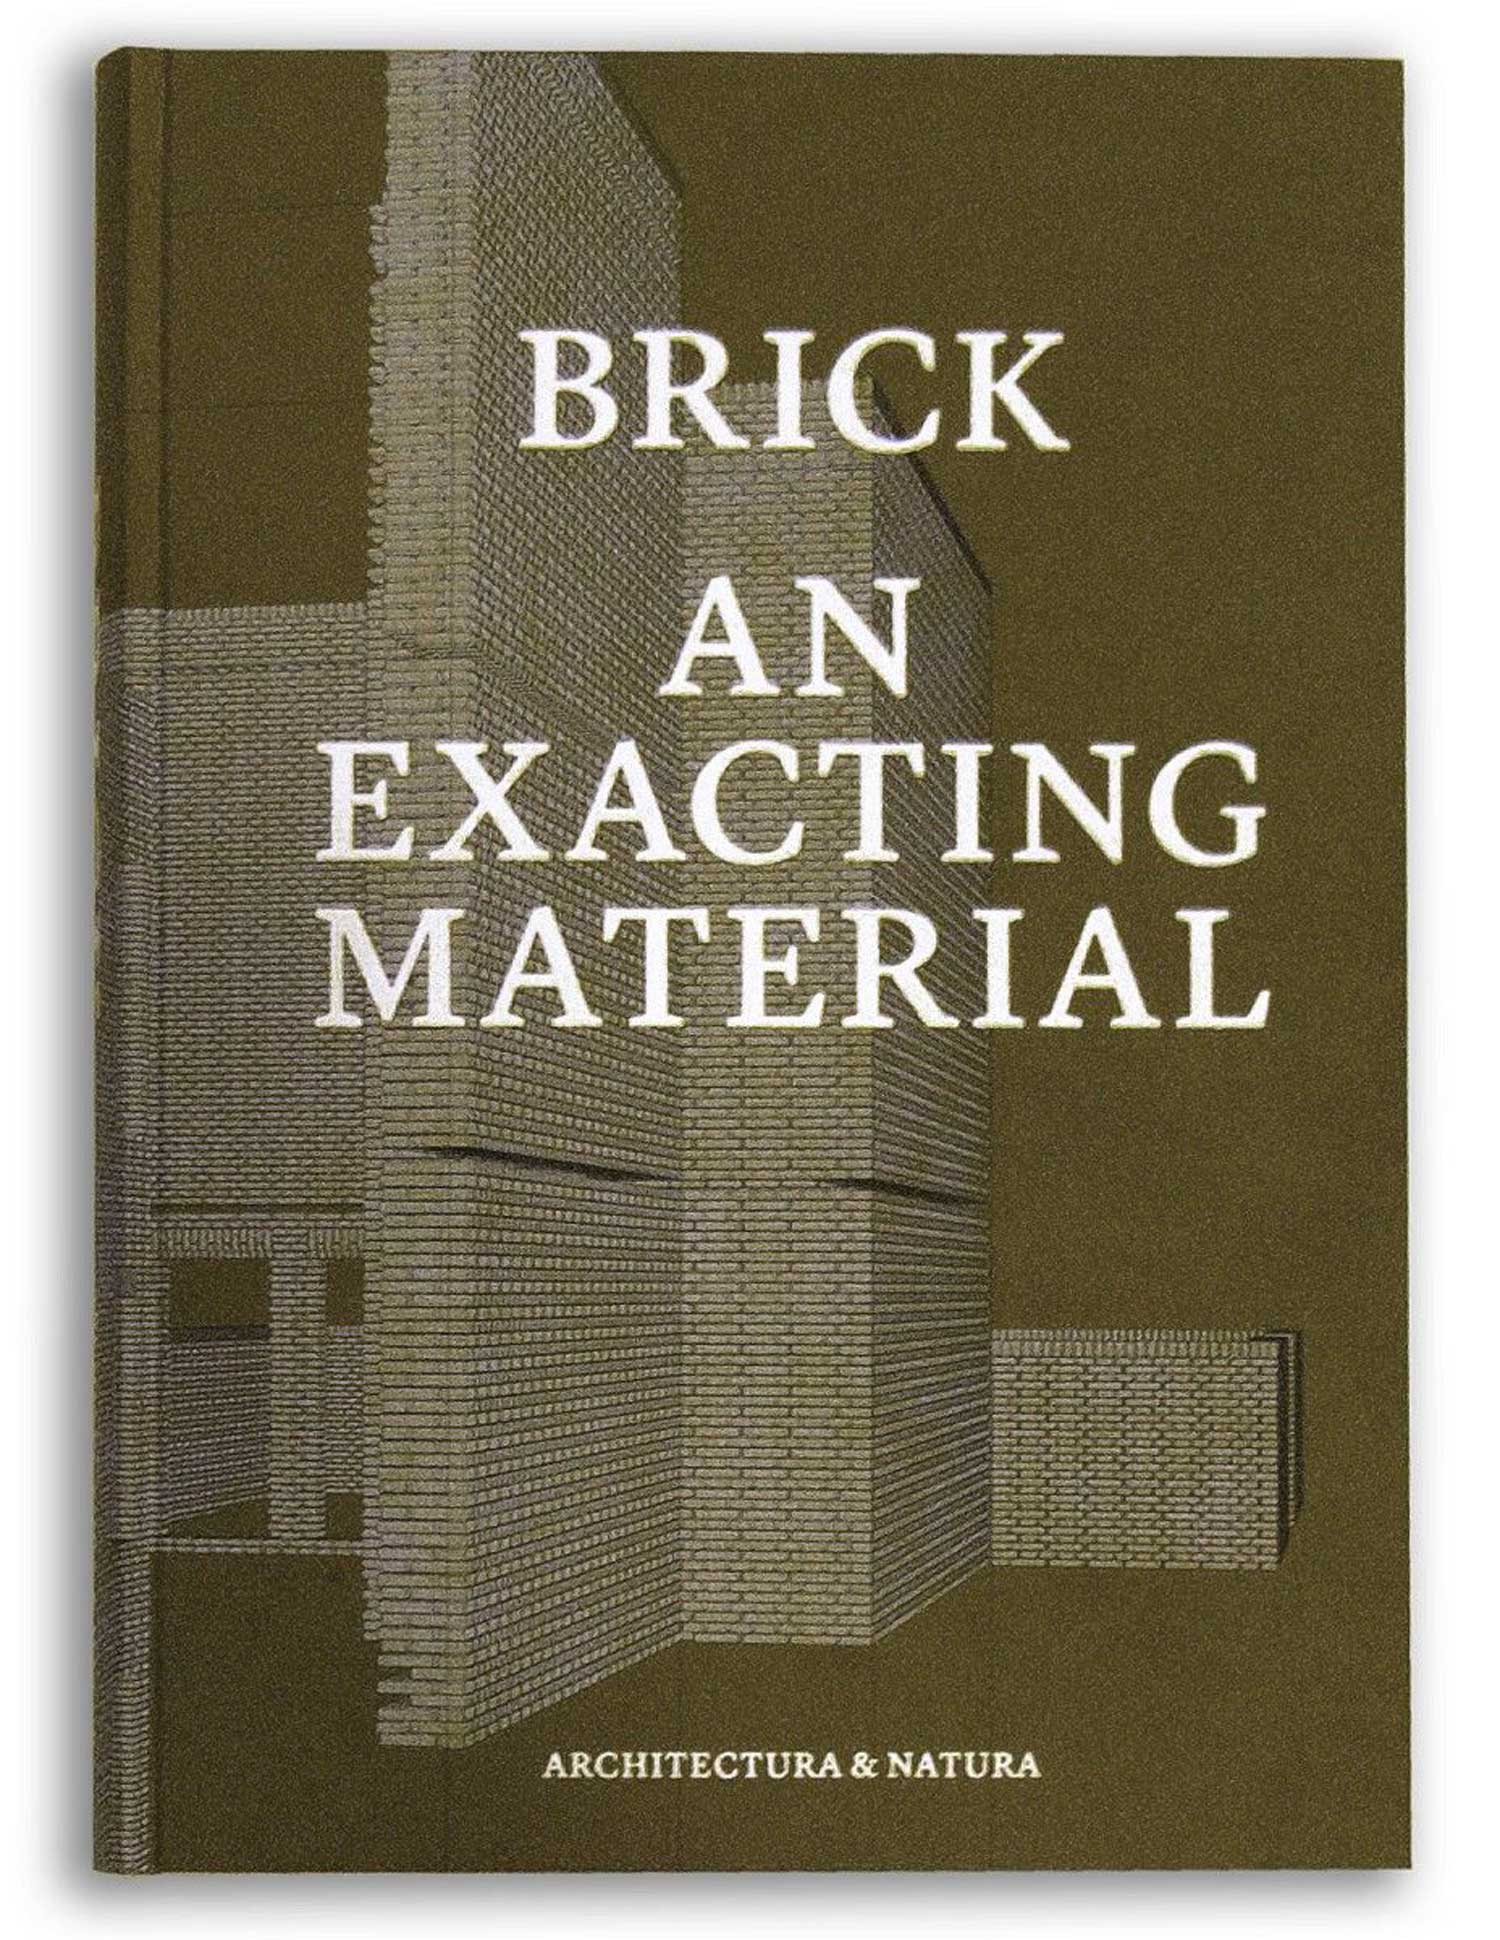 Brick- an exciting material